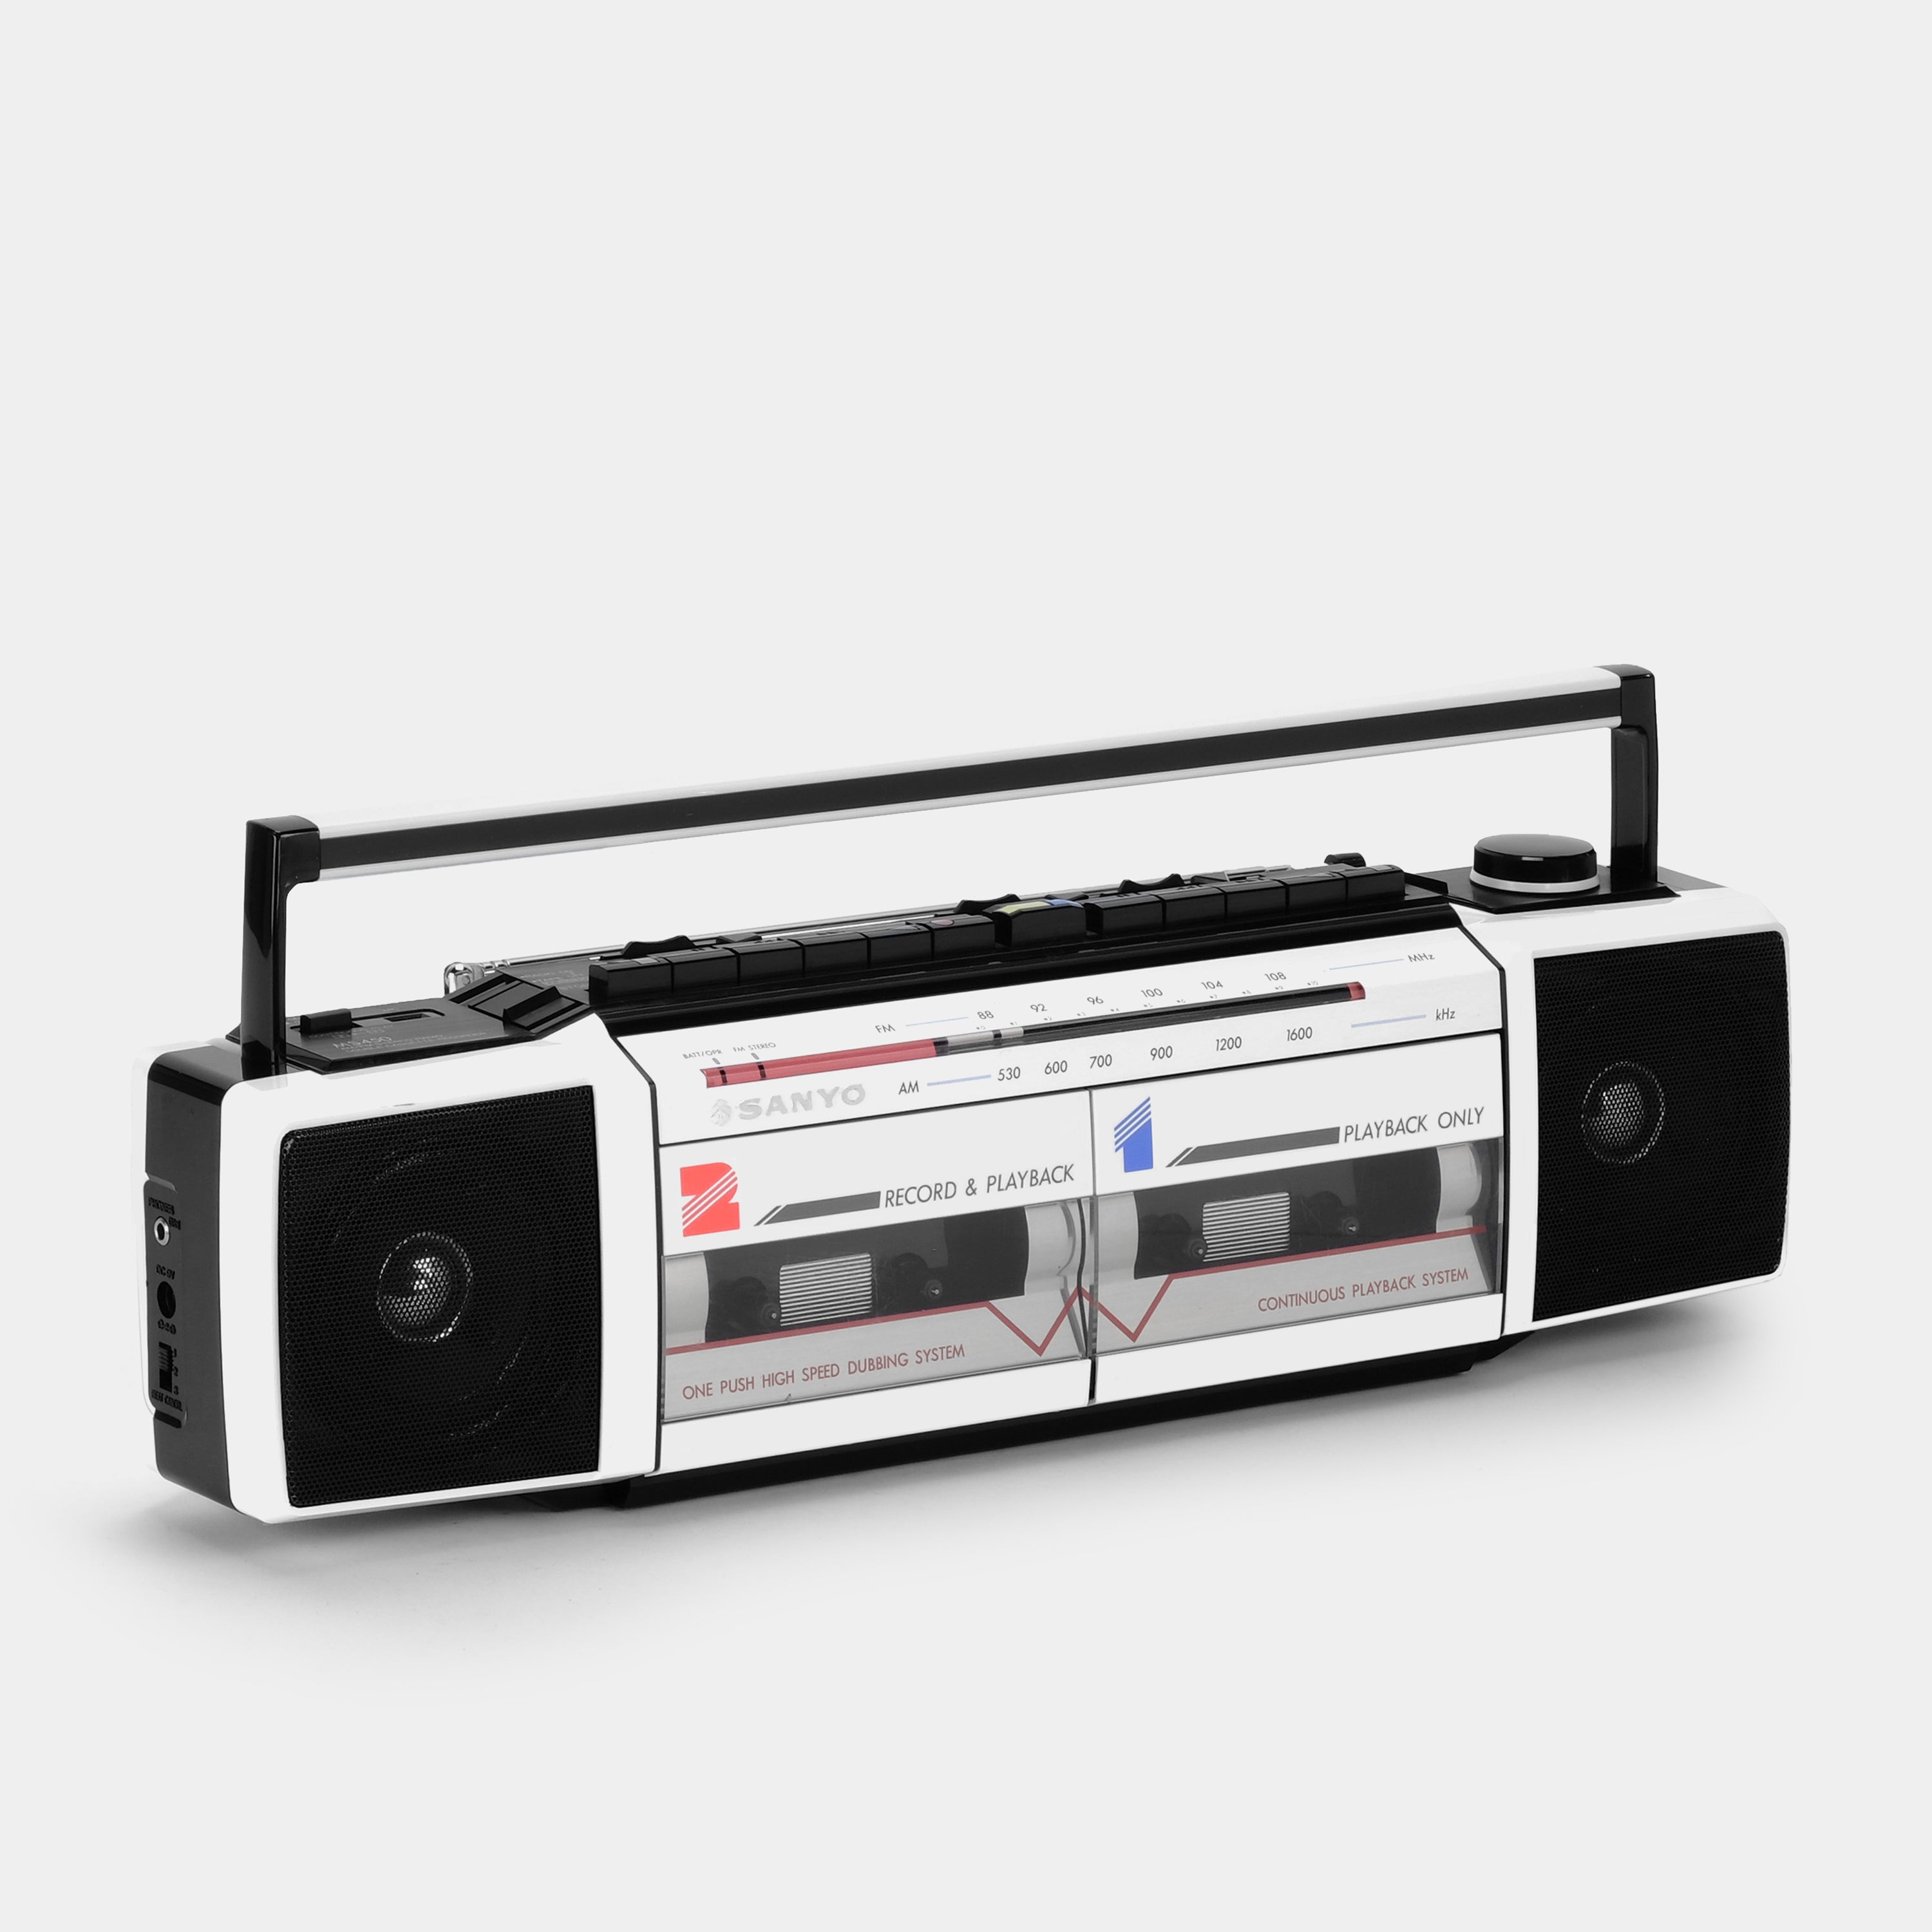 Sanyo MS-450 AM/FM Stereo White Boombox Double Cassette Recorder and Player